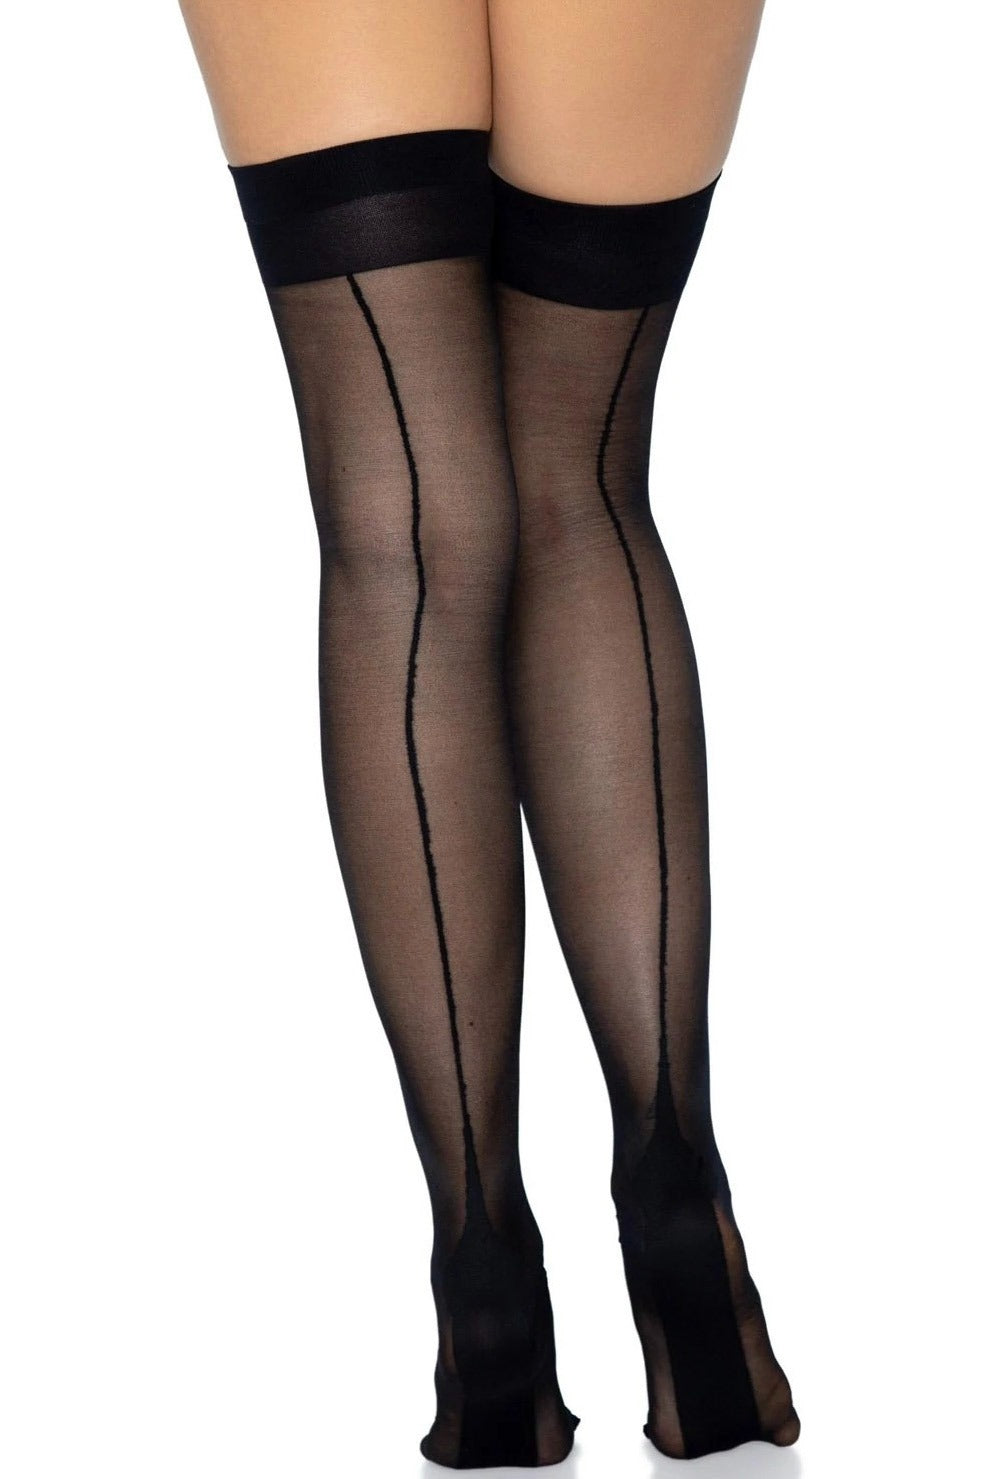 Leg Avenue Sheer Panty with Satin Rhumba in Black FINAL SALE NORMALLY $20 -  Busted Bra Shop